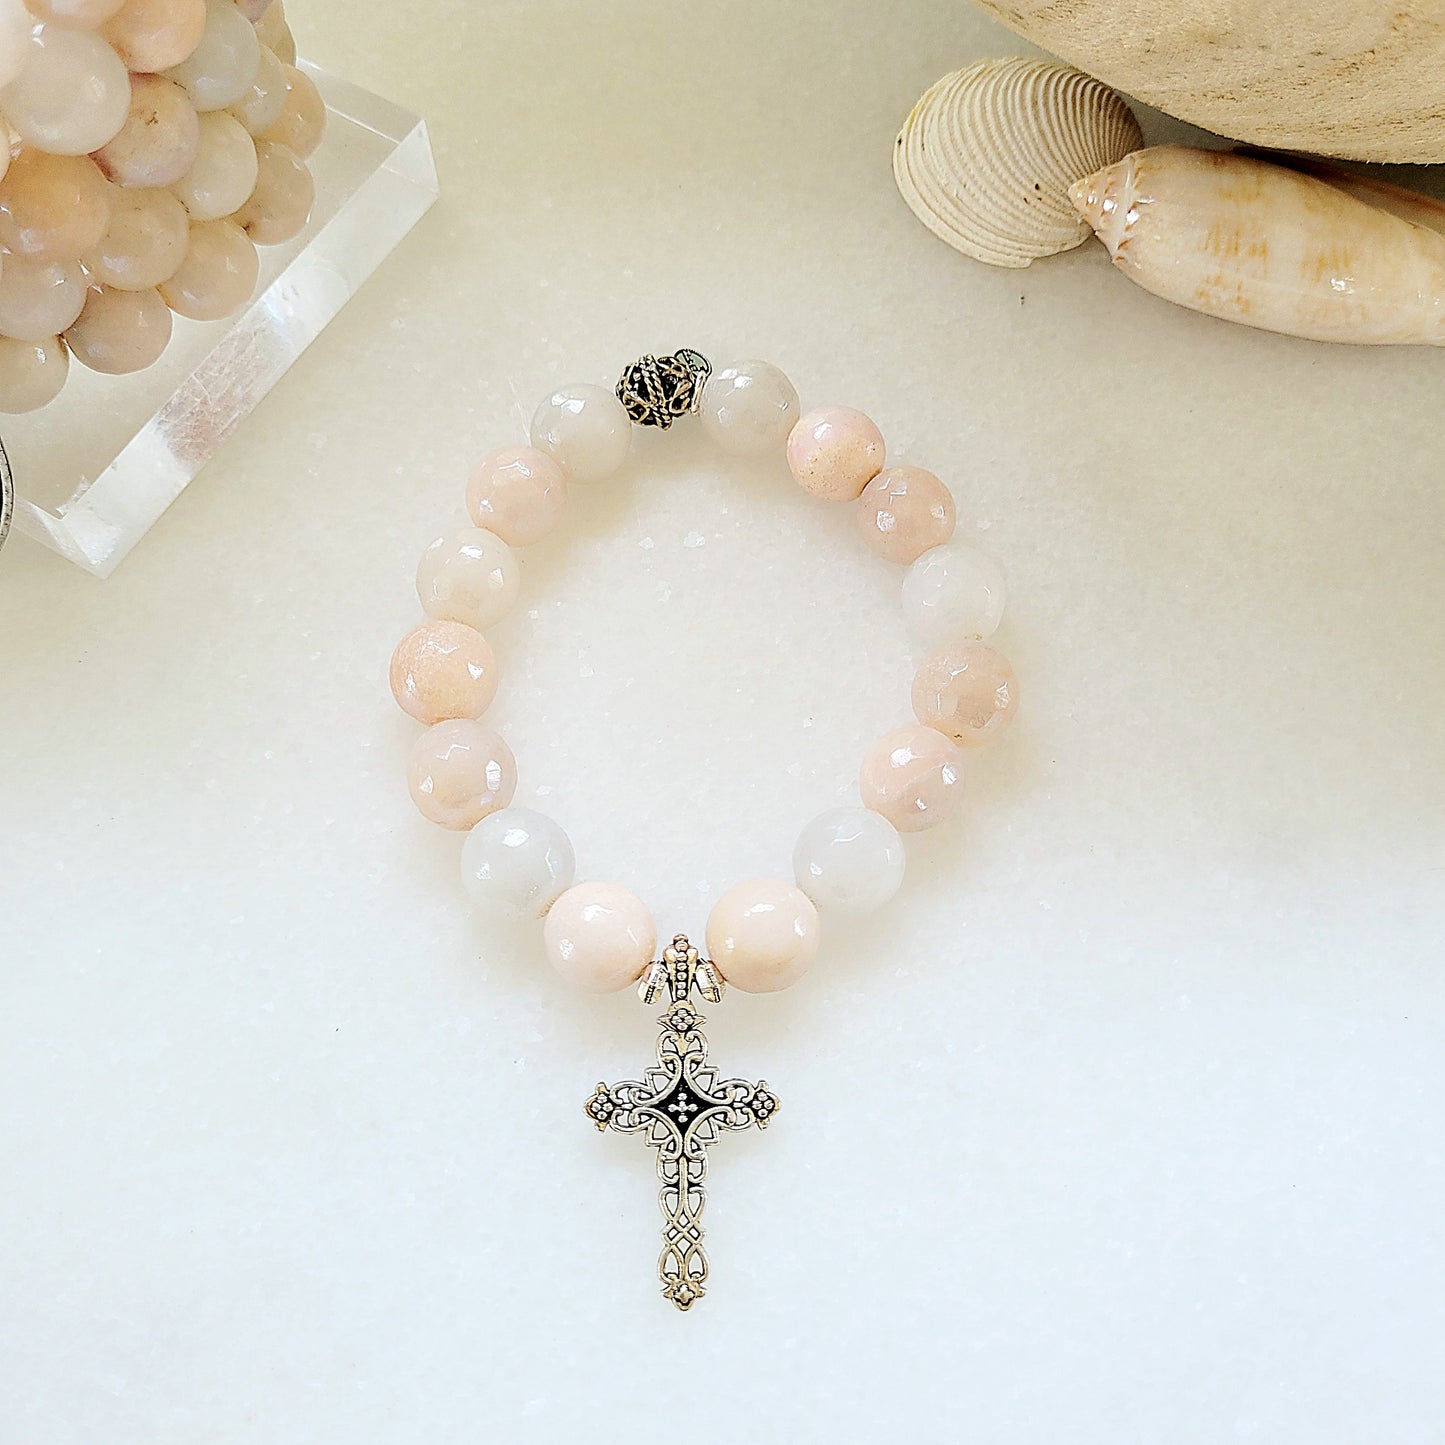 Peach Moonstone Faceted 12mm Beaded Bracelet w/ Silver Filigree Cross - Afterlife Jewelry Designs